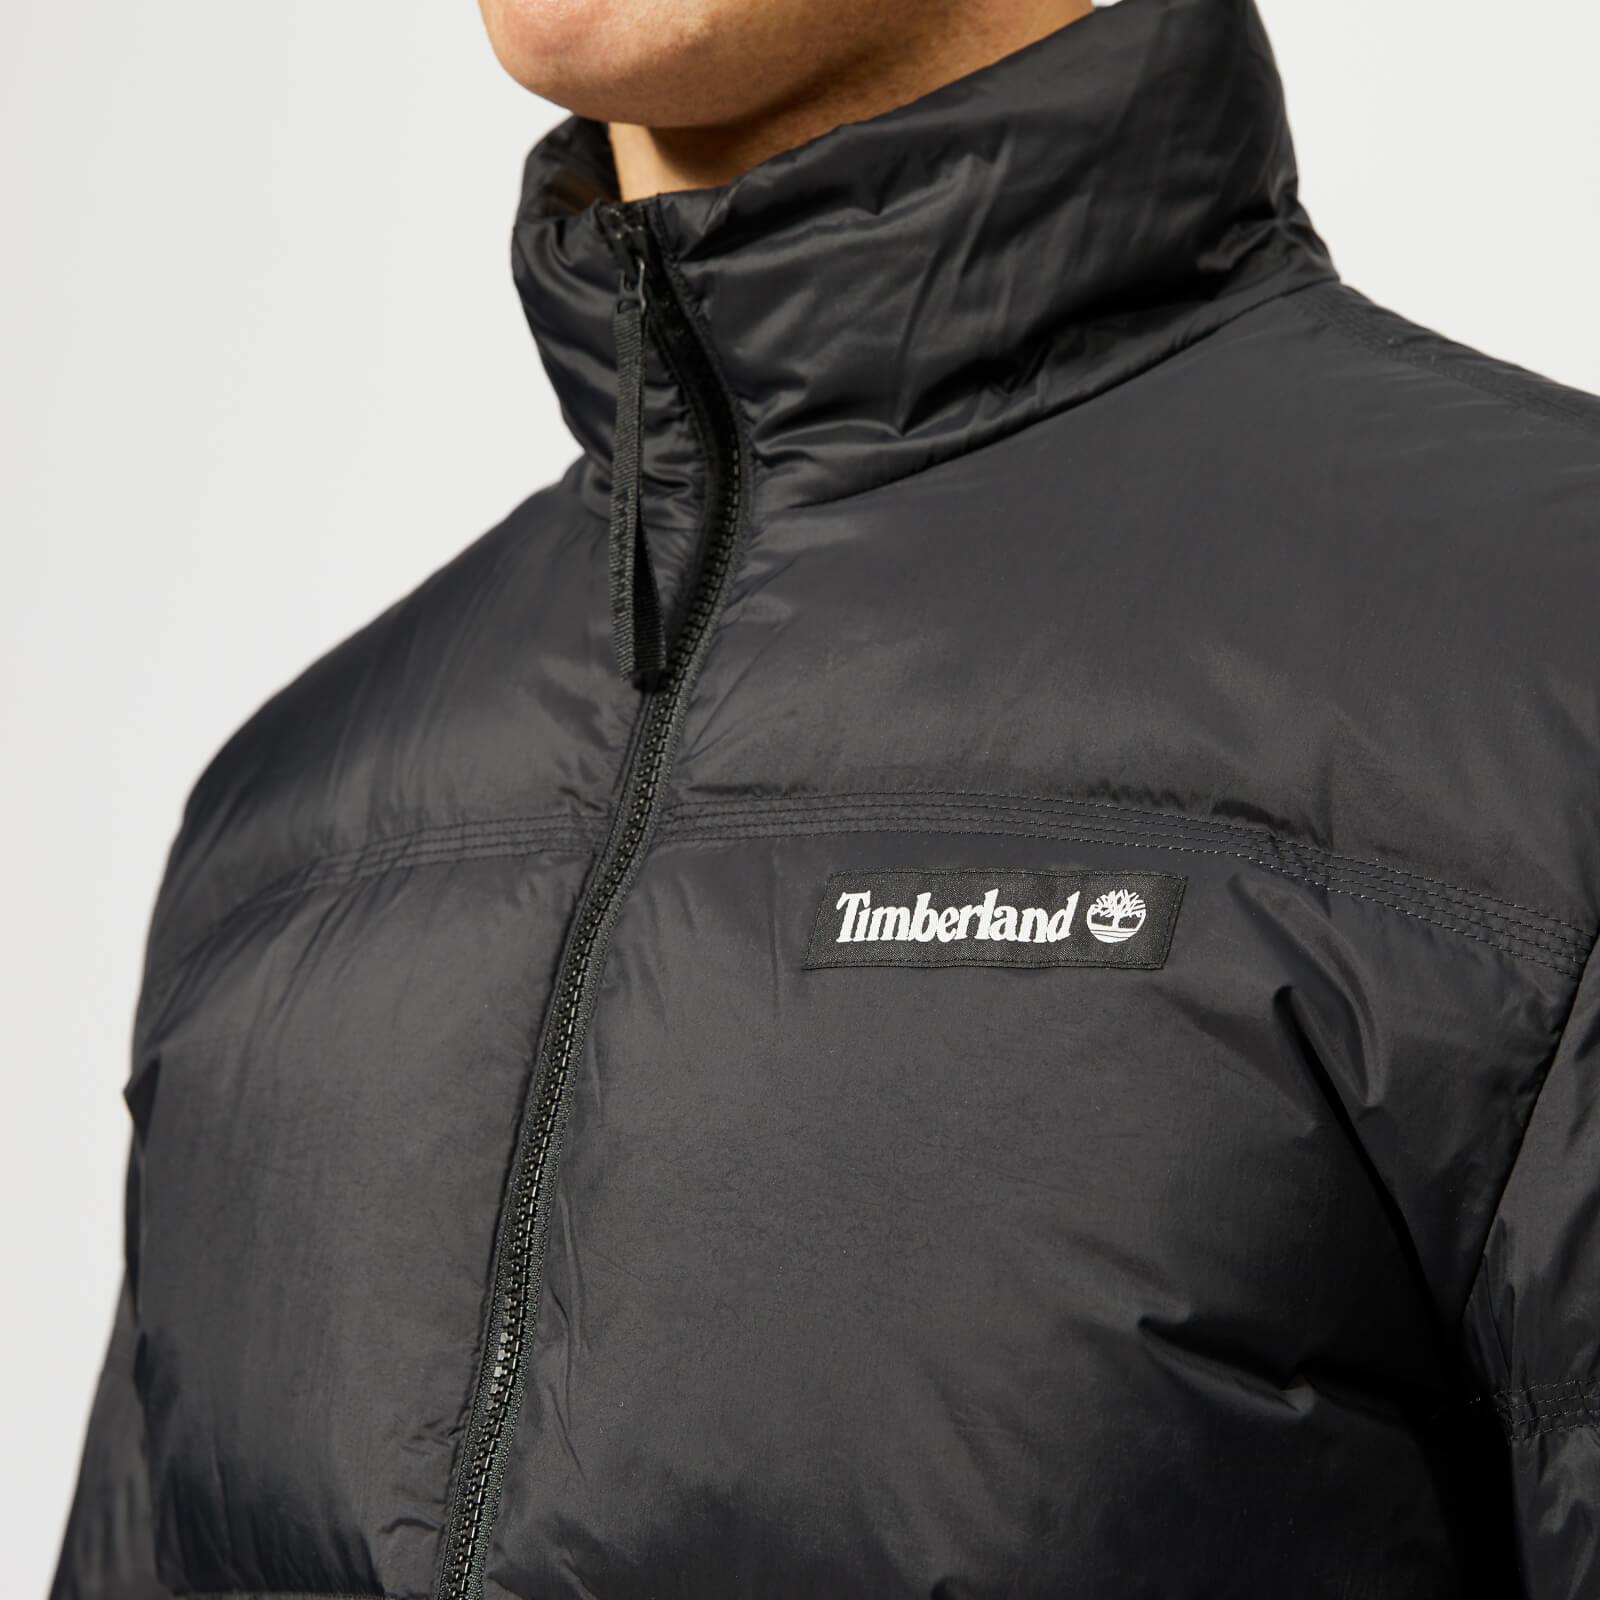 Timberland Synthetic Sls Down Puffer Jacket in Black for Men - Lyst